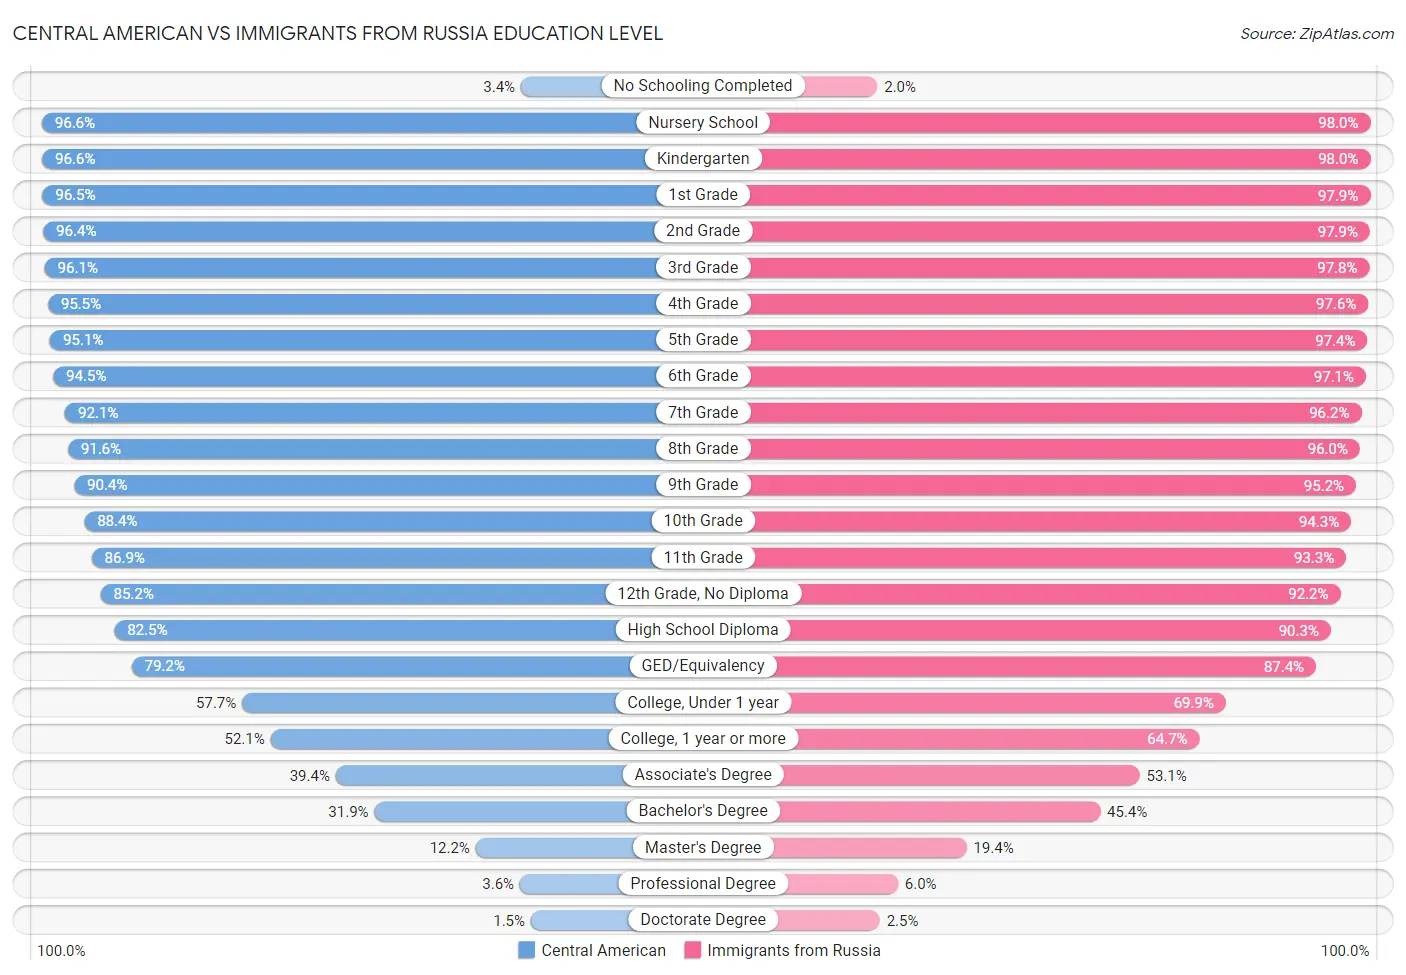 Central American vs Immigrants from Russia Education Level